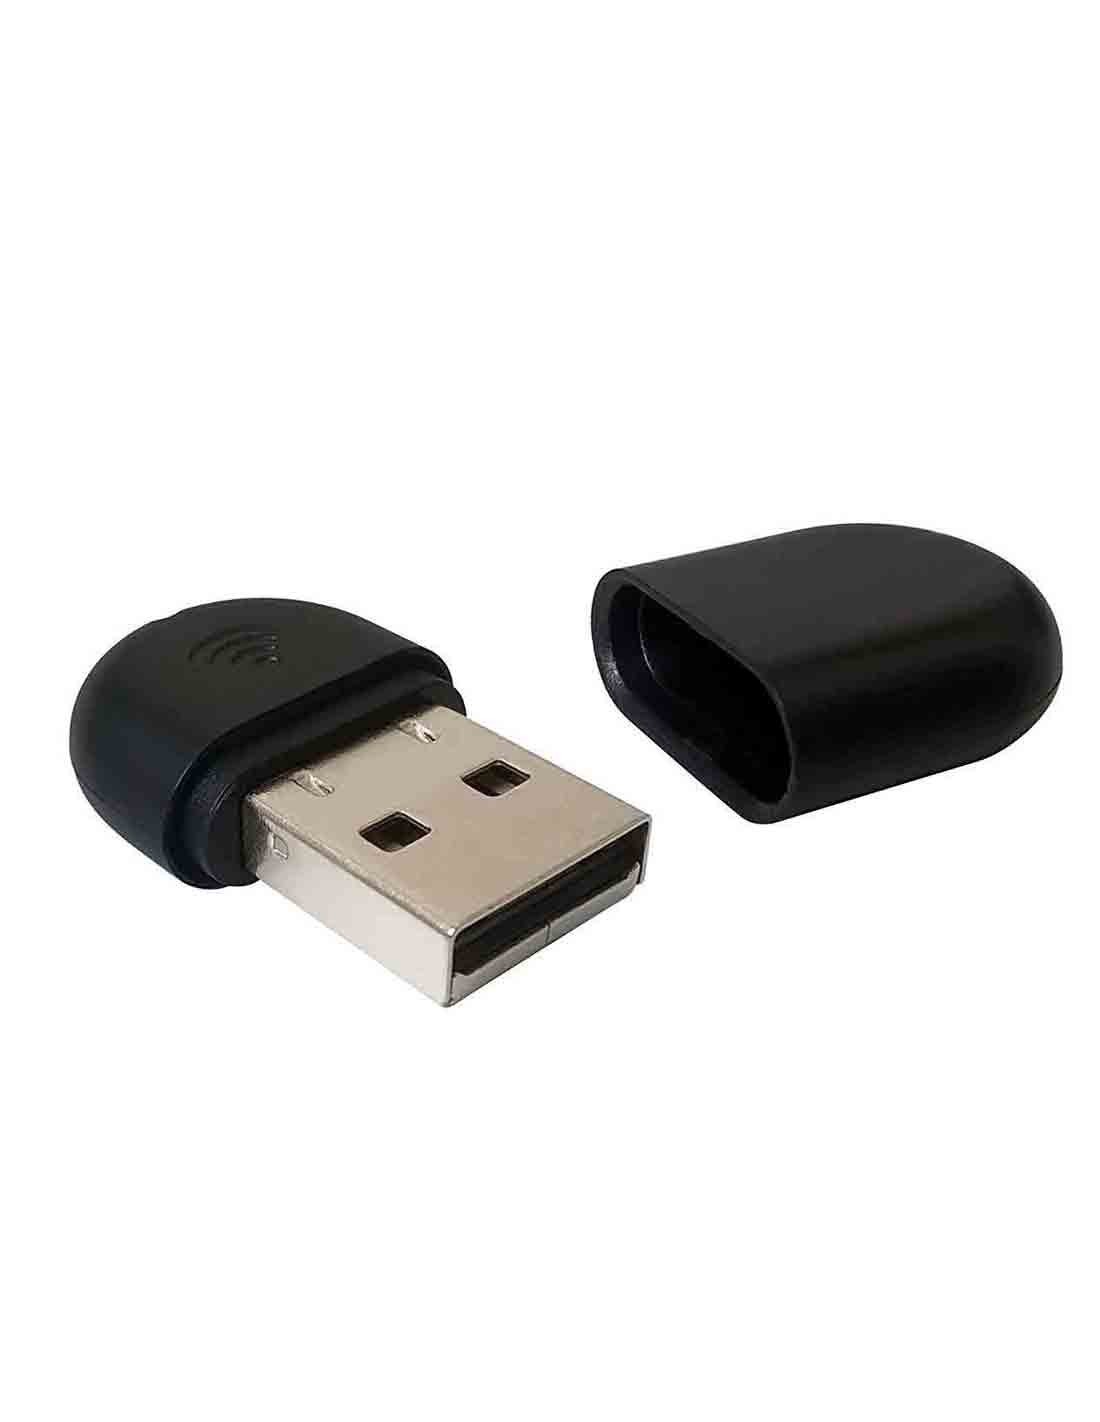 Yealink WF40 WiFi USB Dongle for SIP-T48G VoIP IP Phone at a Cheap Price in Dubai